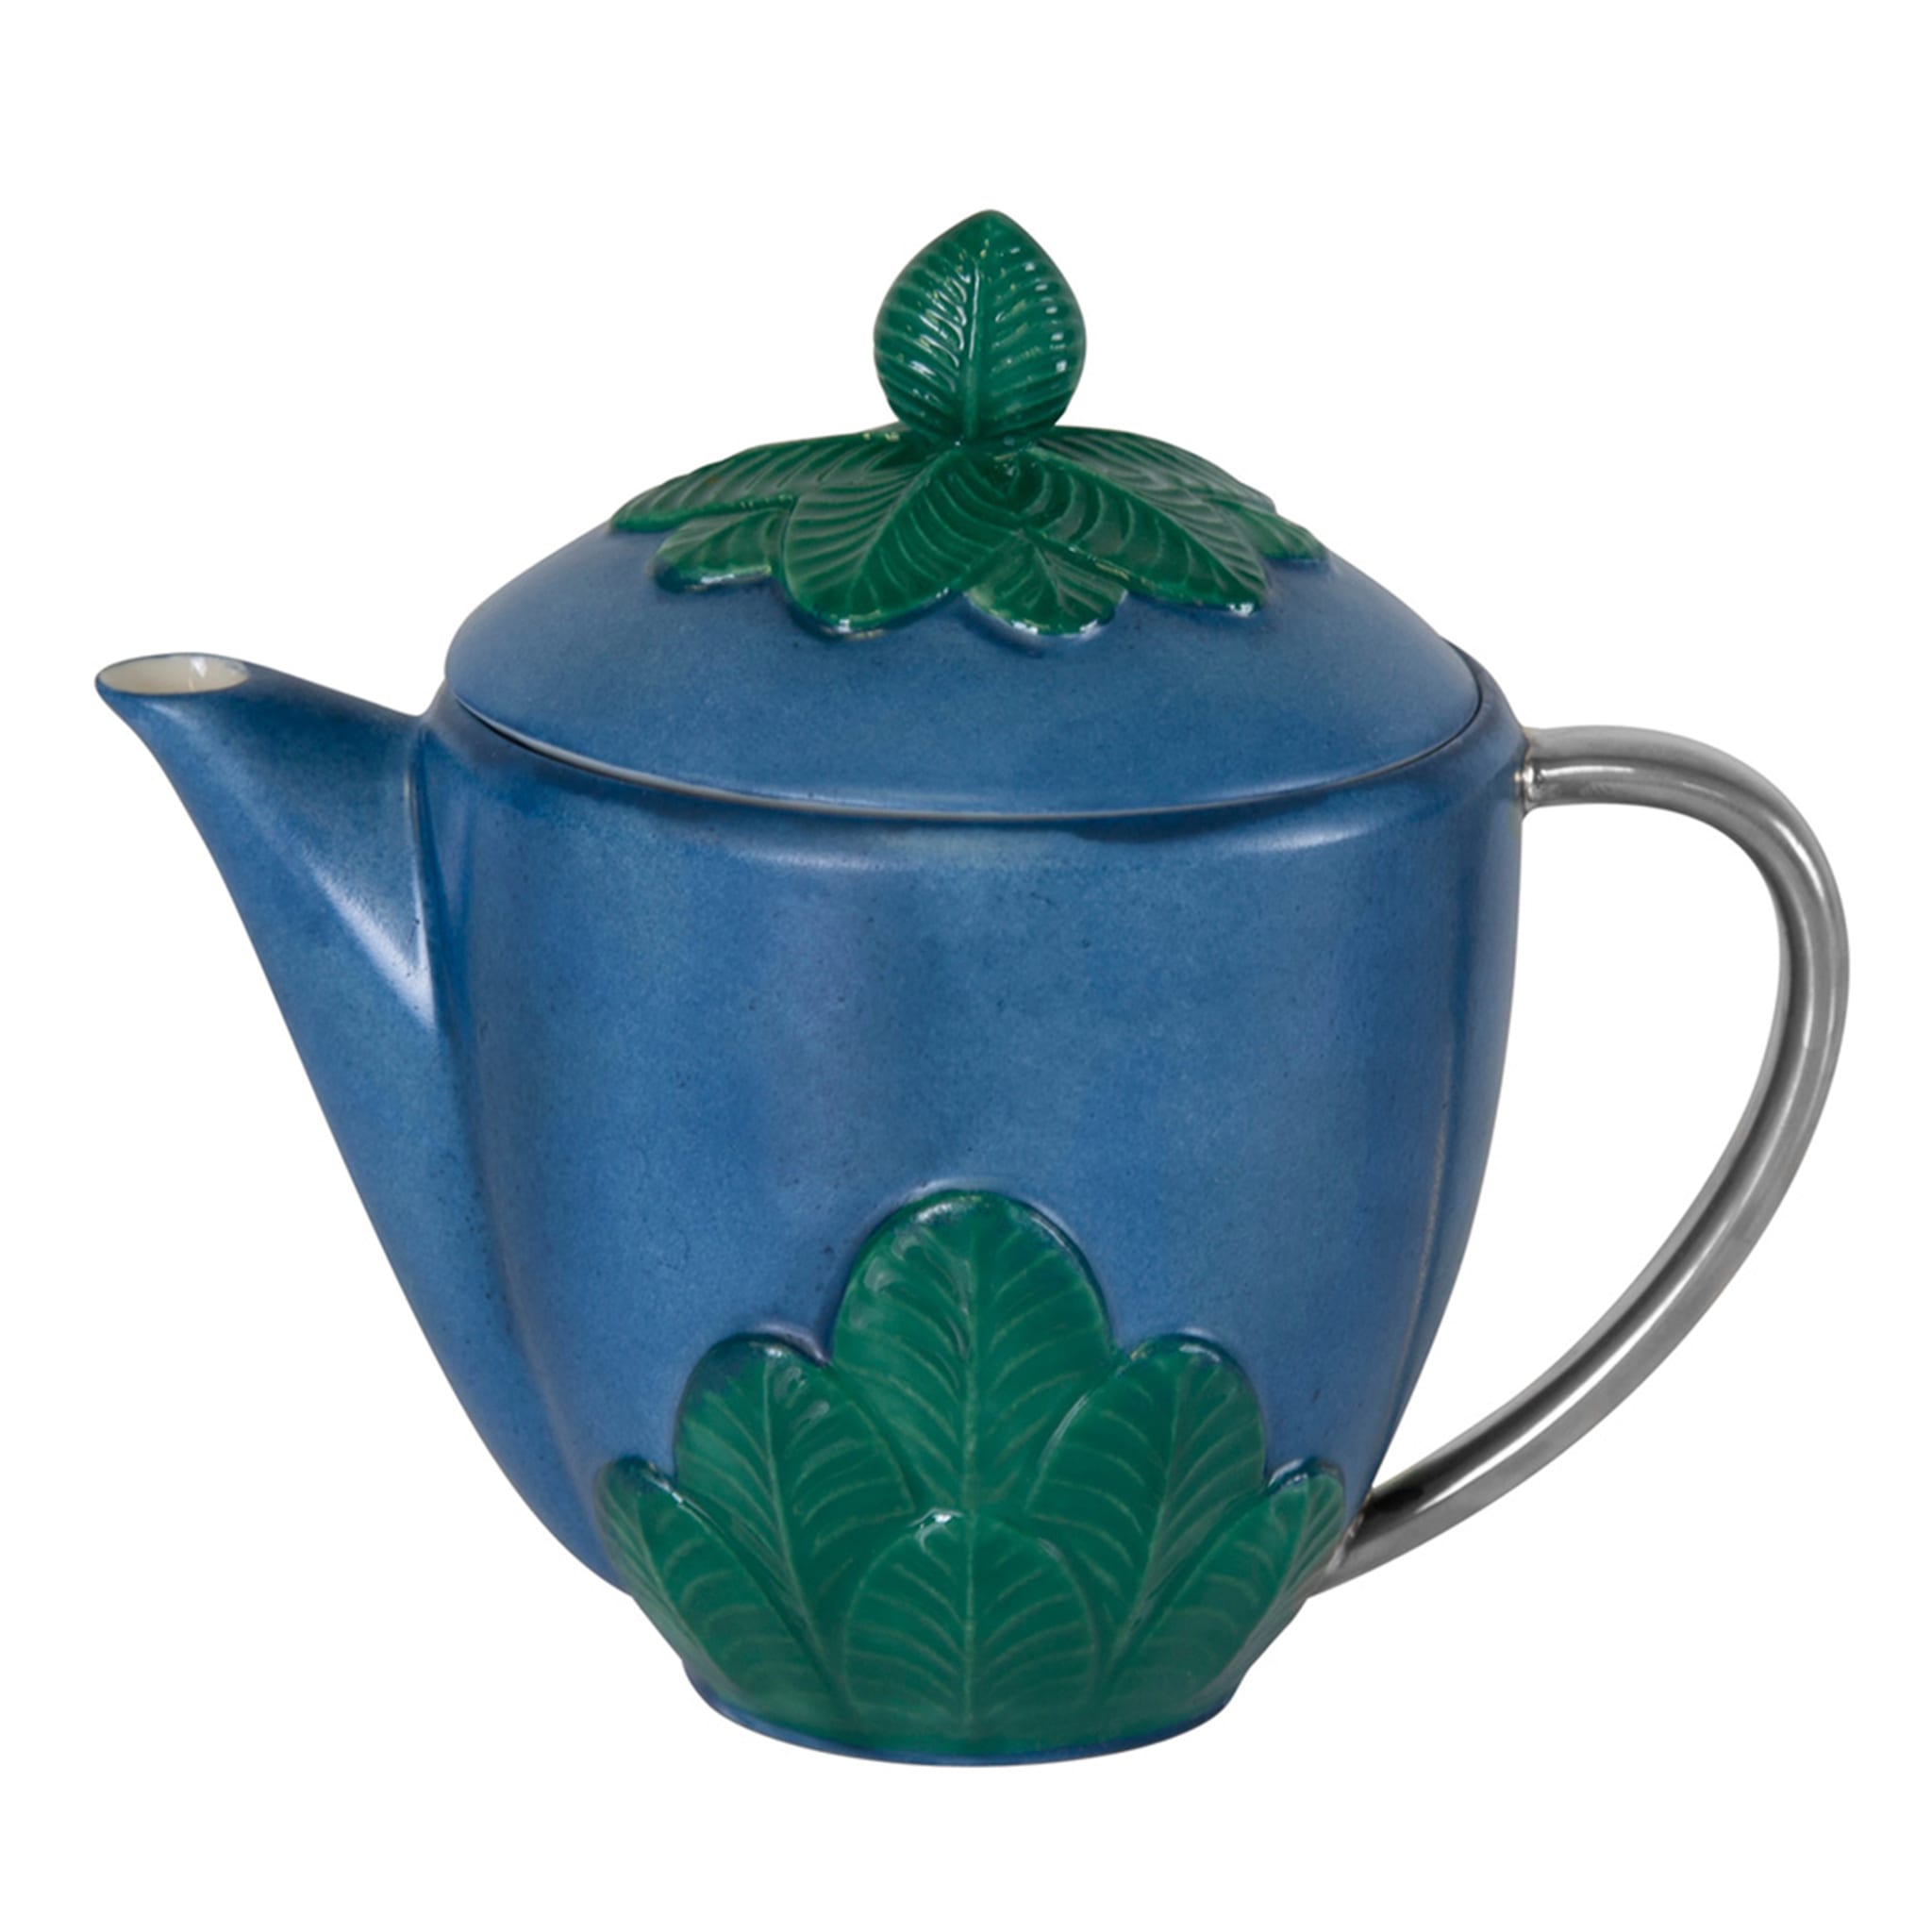 PEACOCK CREAMER - BLUE AND SILVER - Main view